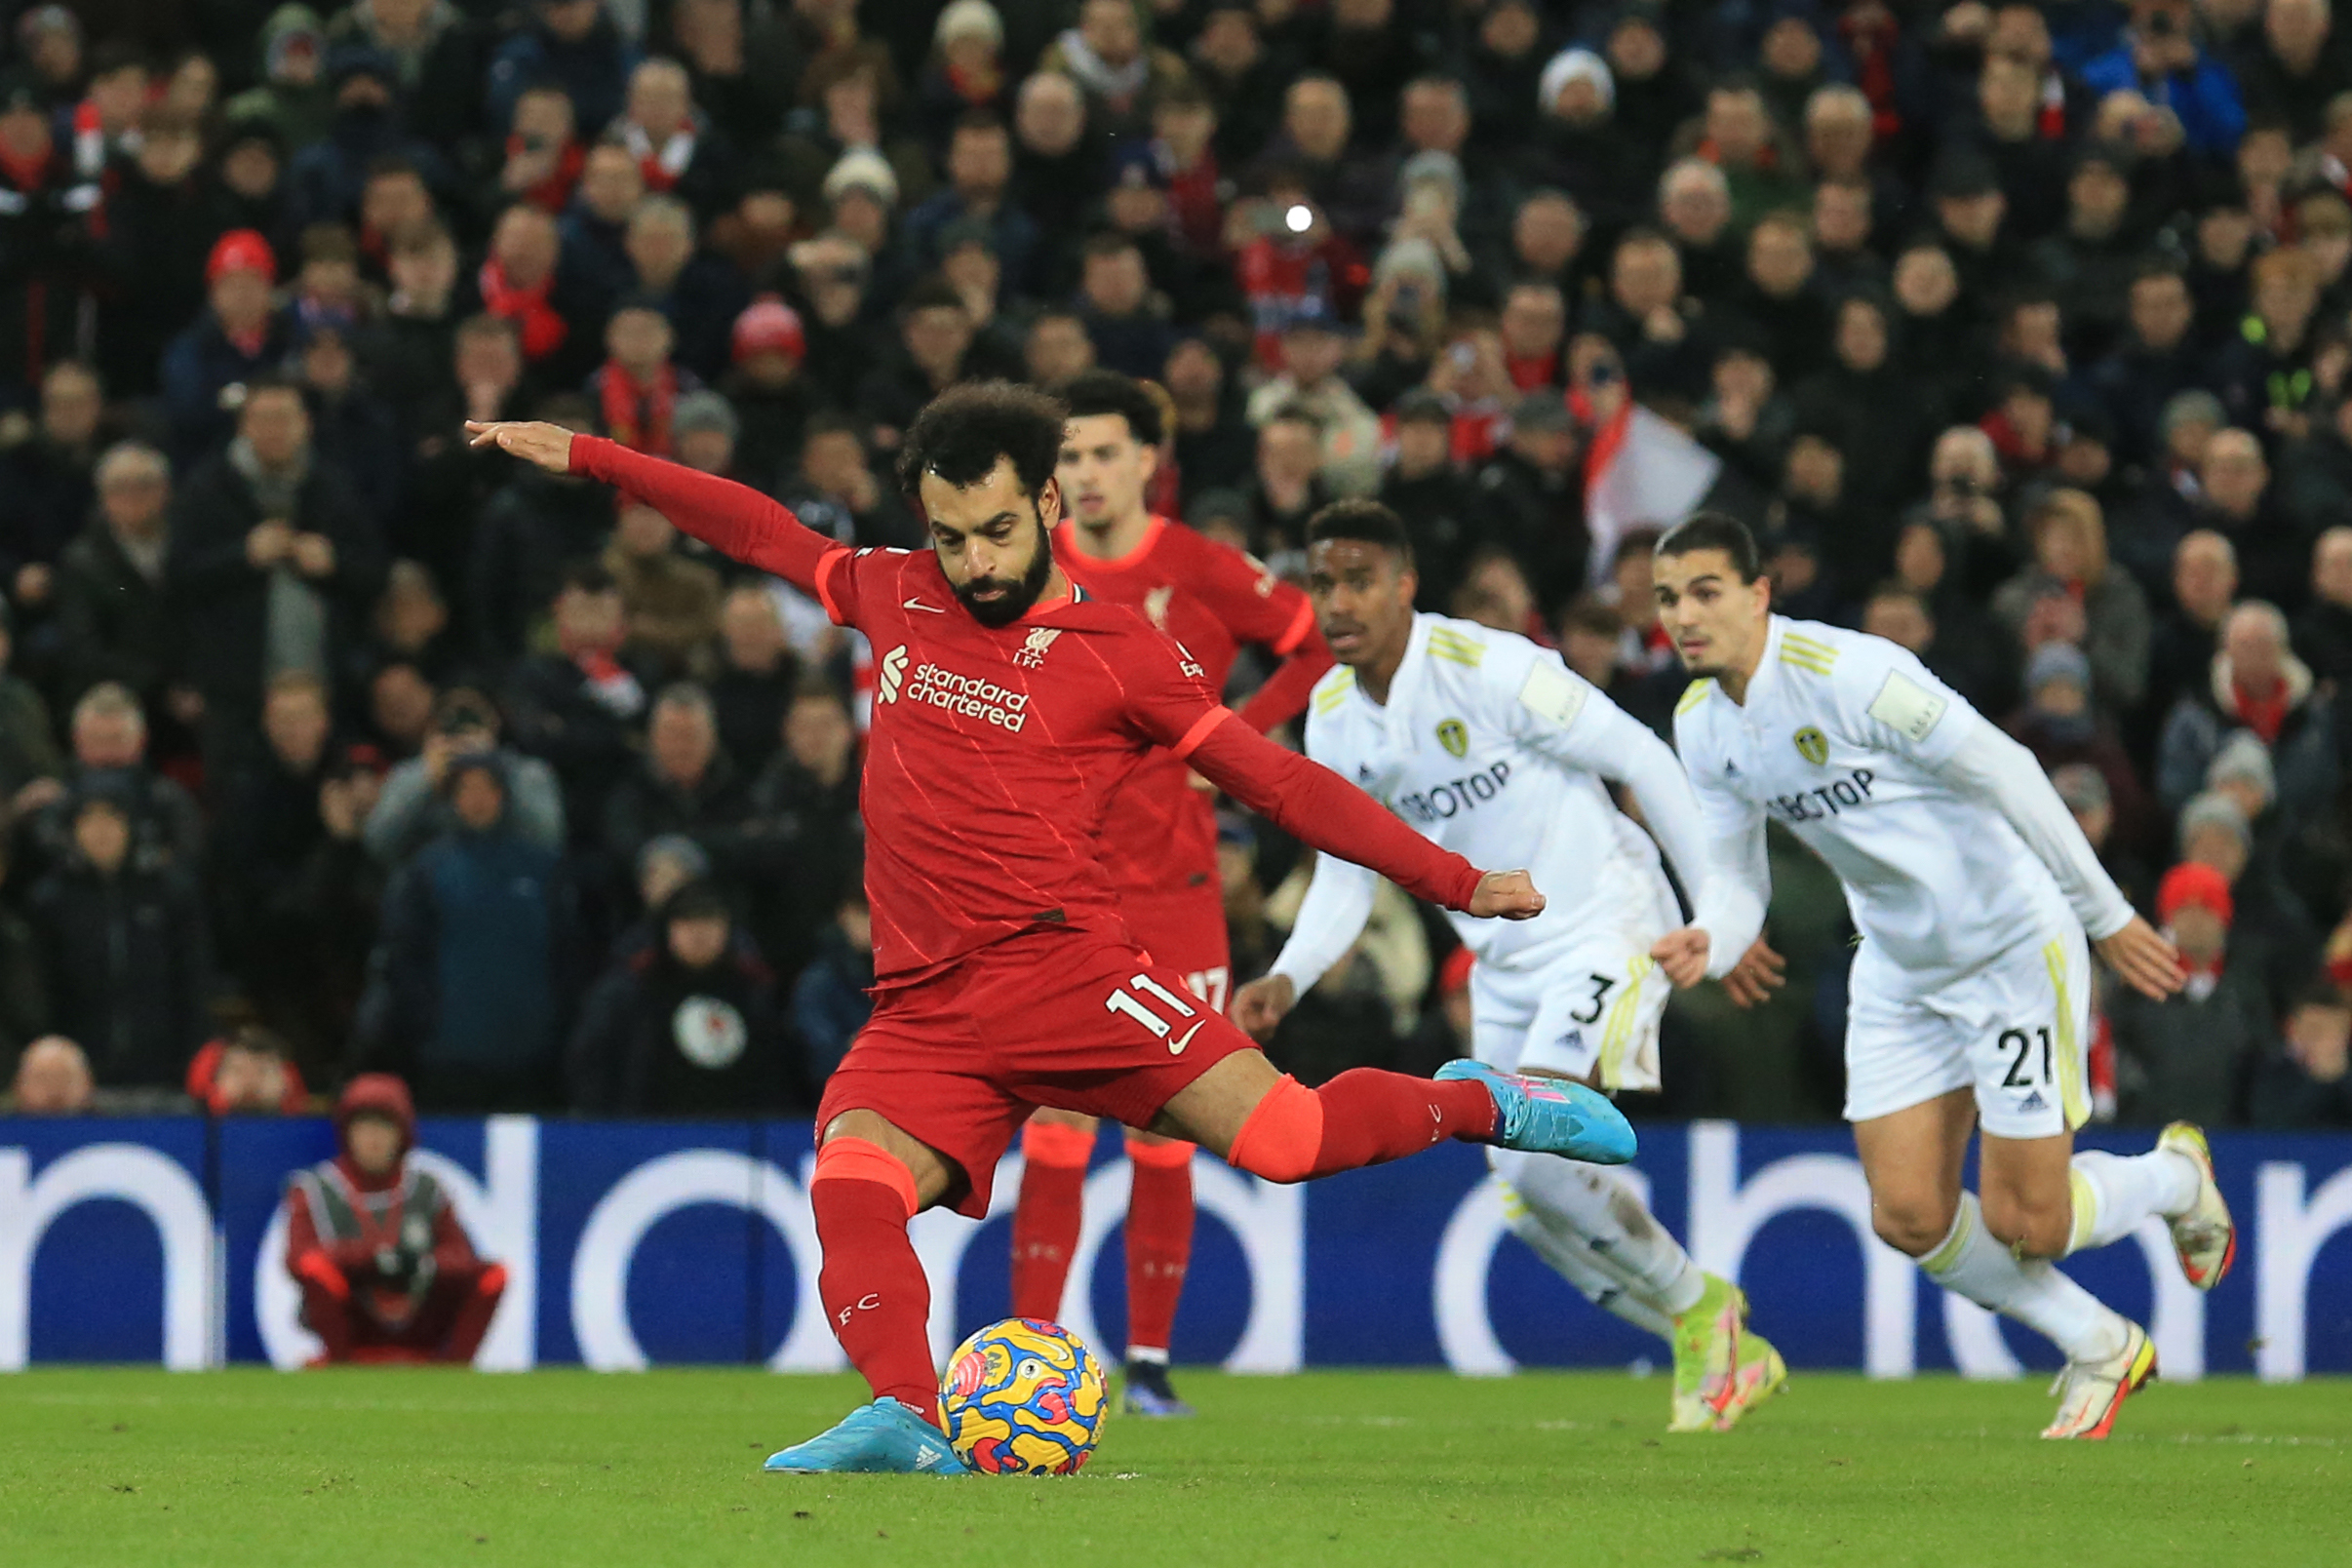 Liverpool 6-0 Leeds United Highlights: Liverpool close the point gap to 3 points on Man City after the dominant Reds thrashed Leeds United for six goals